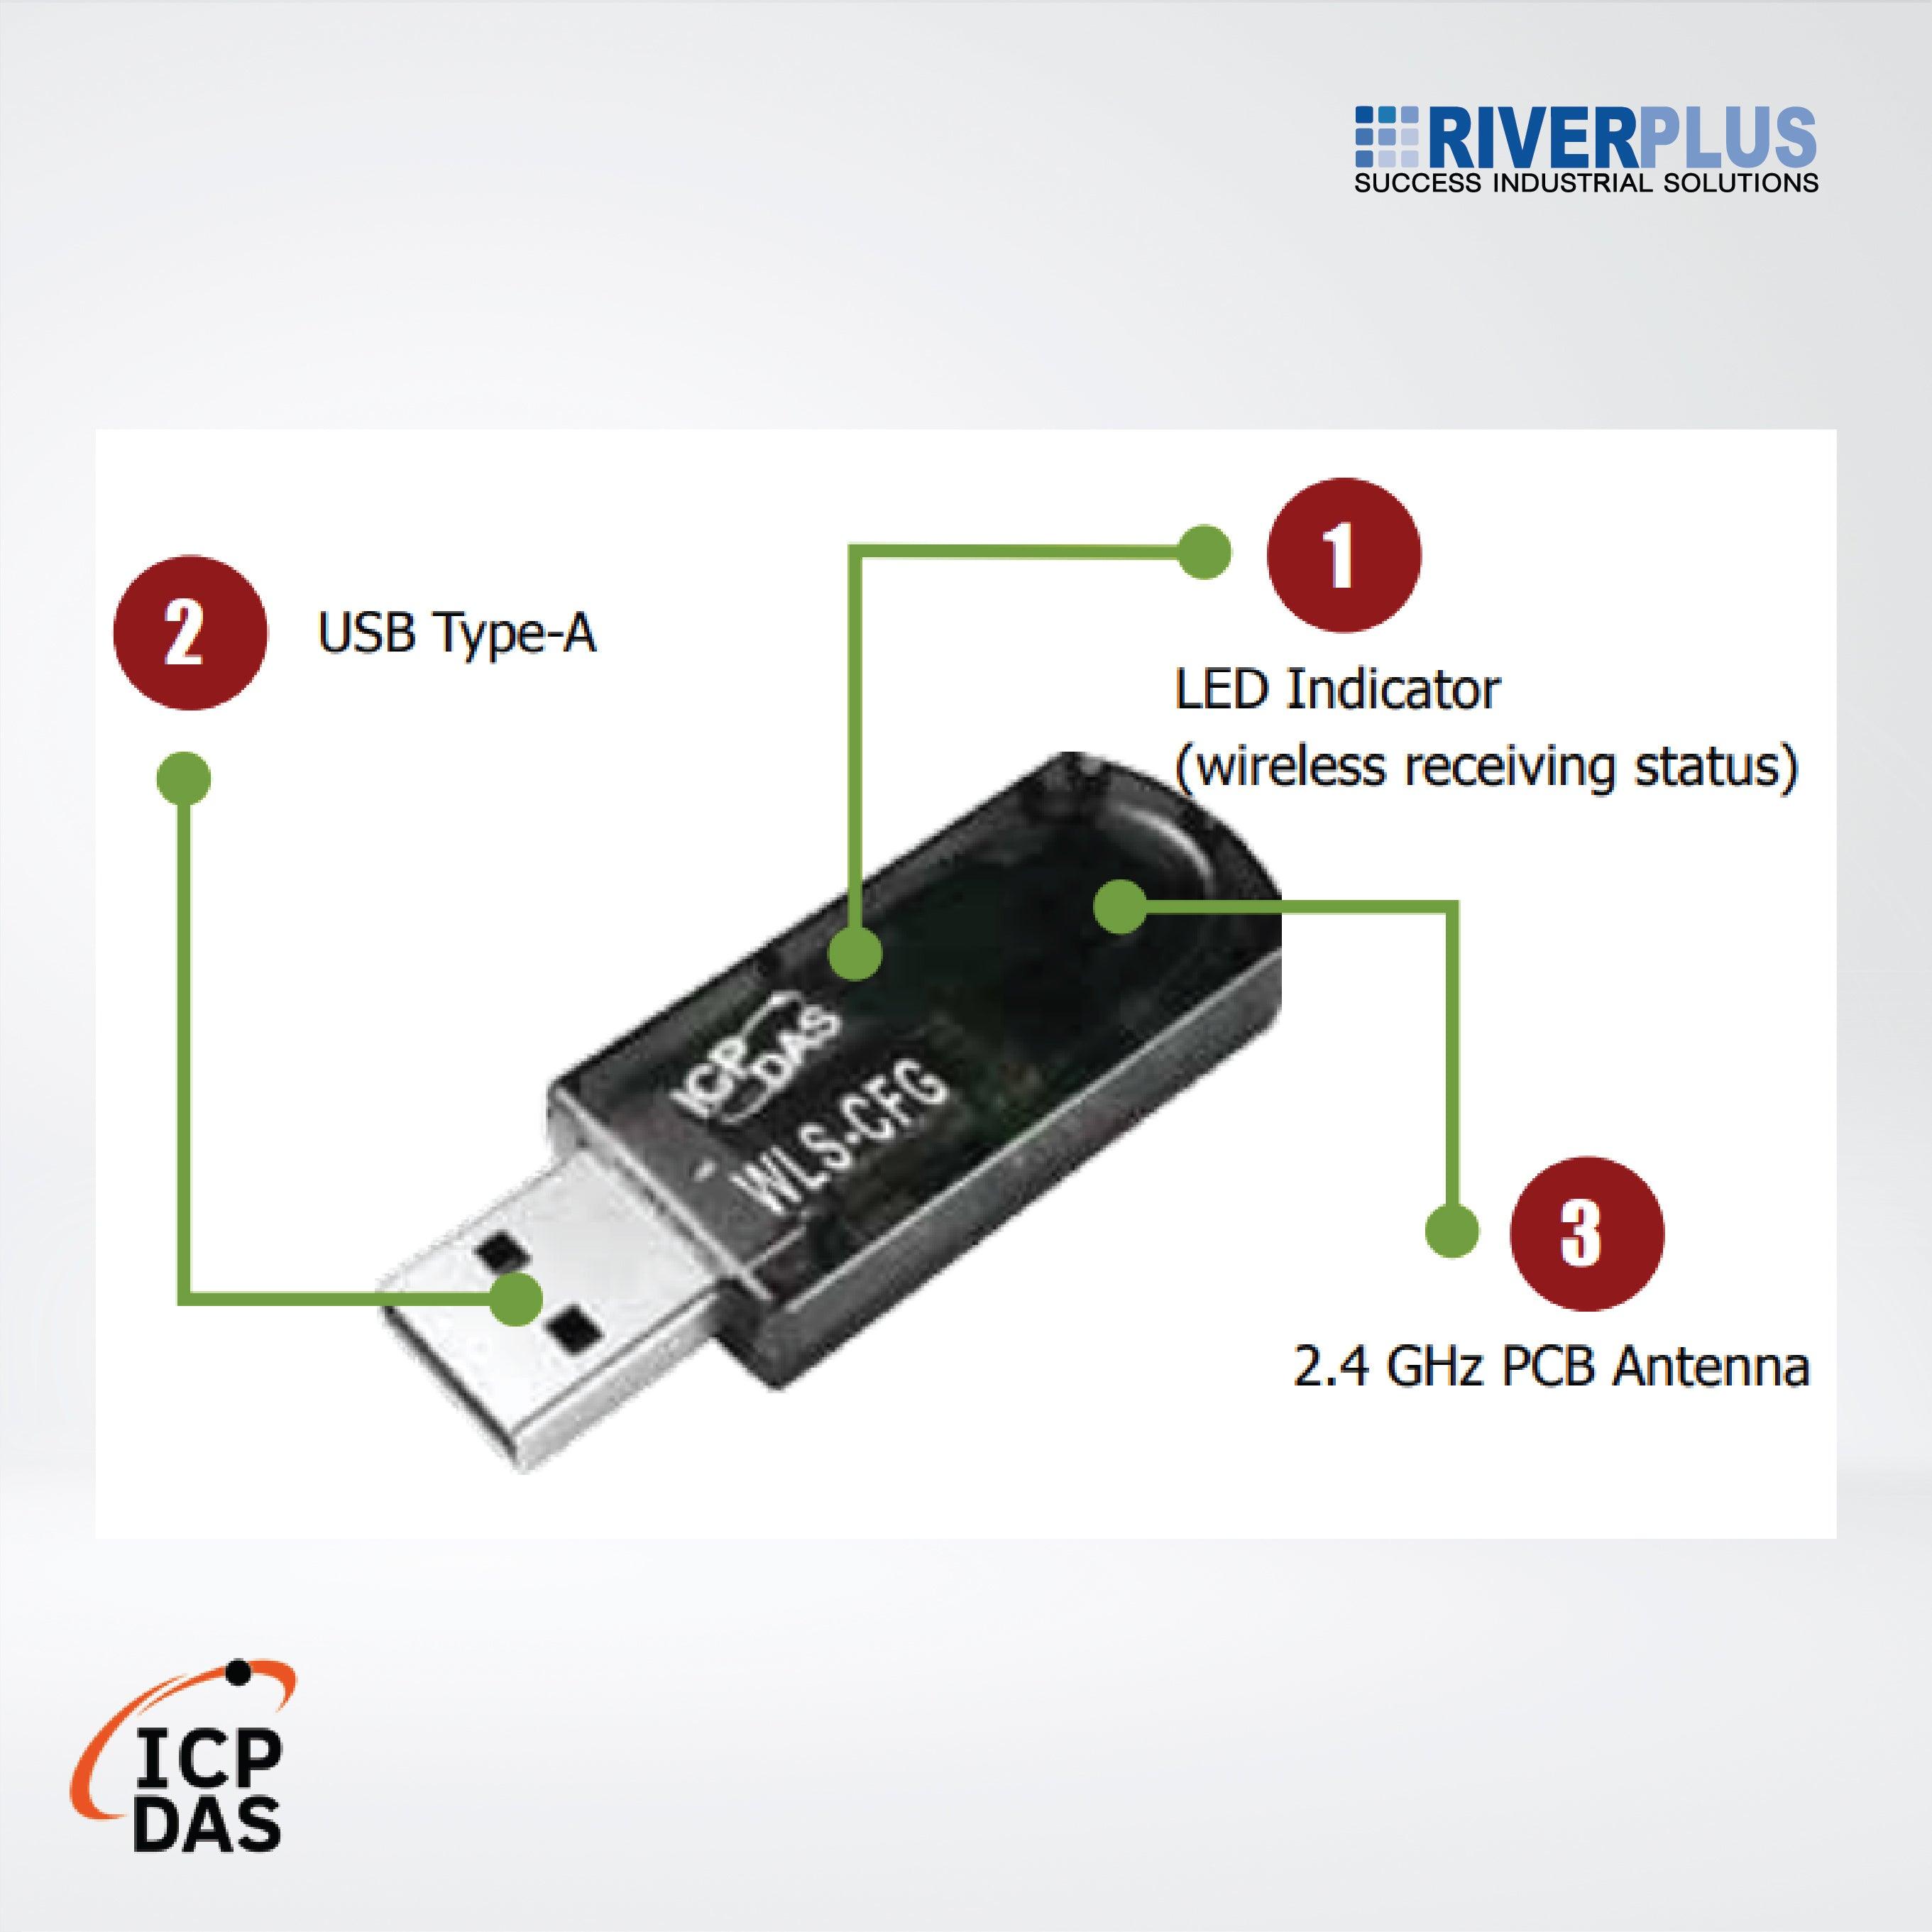 WLS-CFG Wireless Location System Configurator (Asia Only) - Riverplus